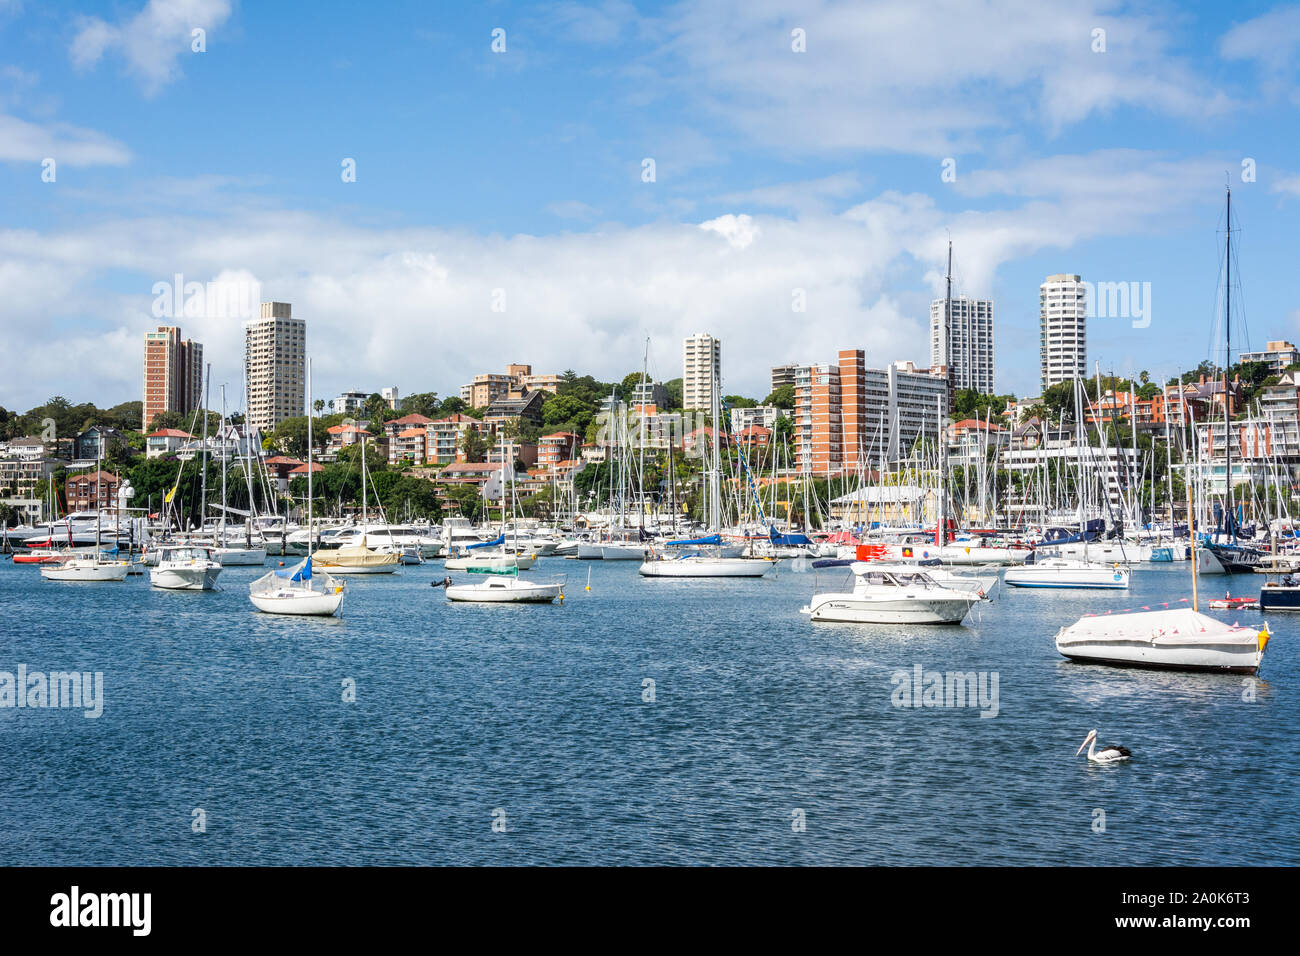 Sydney, Australia - March 10, 2017. View of yachts and boats in Rushcutters Bay in Sydney, Australia. Stock Photo